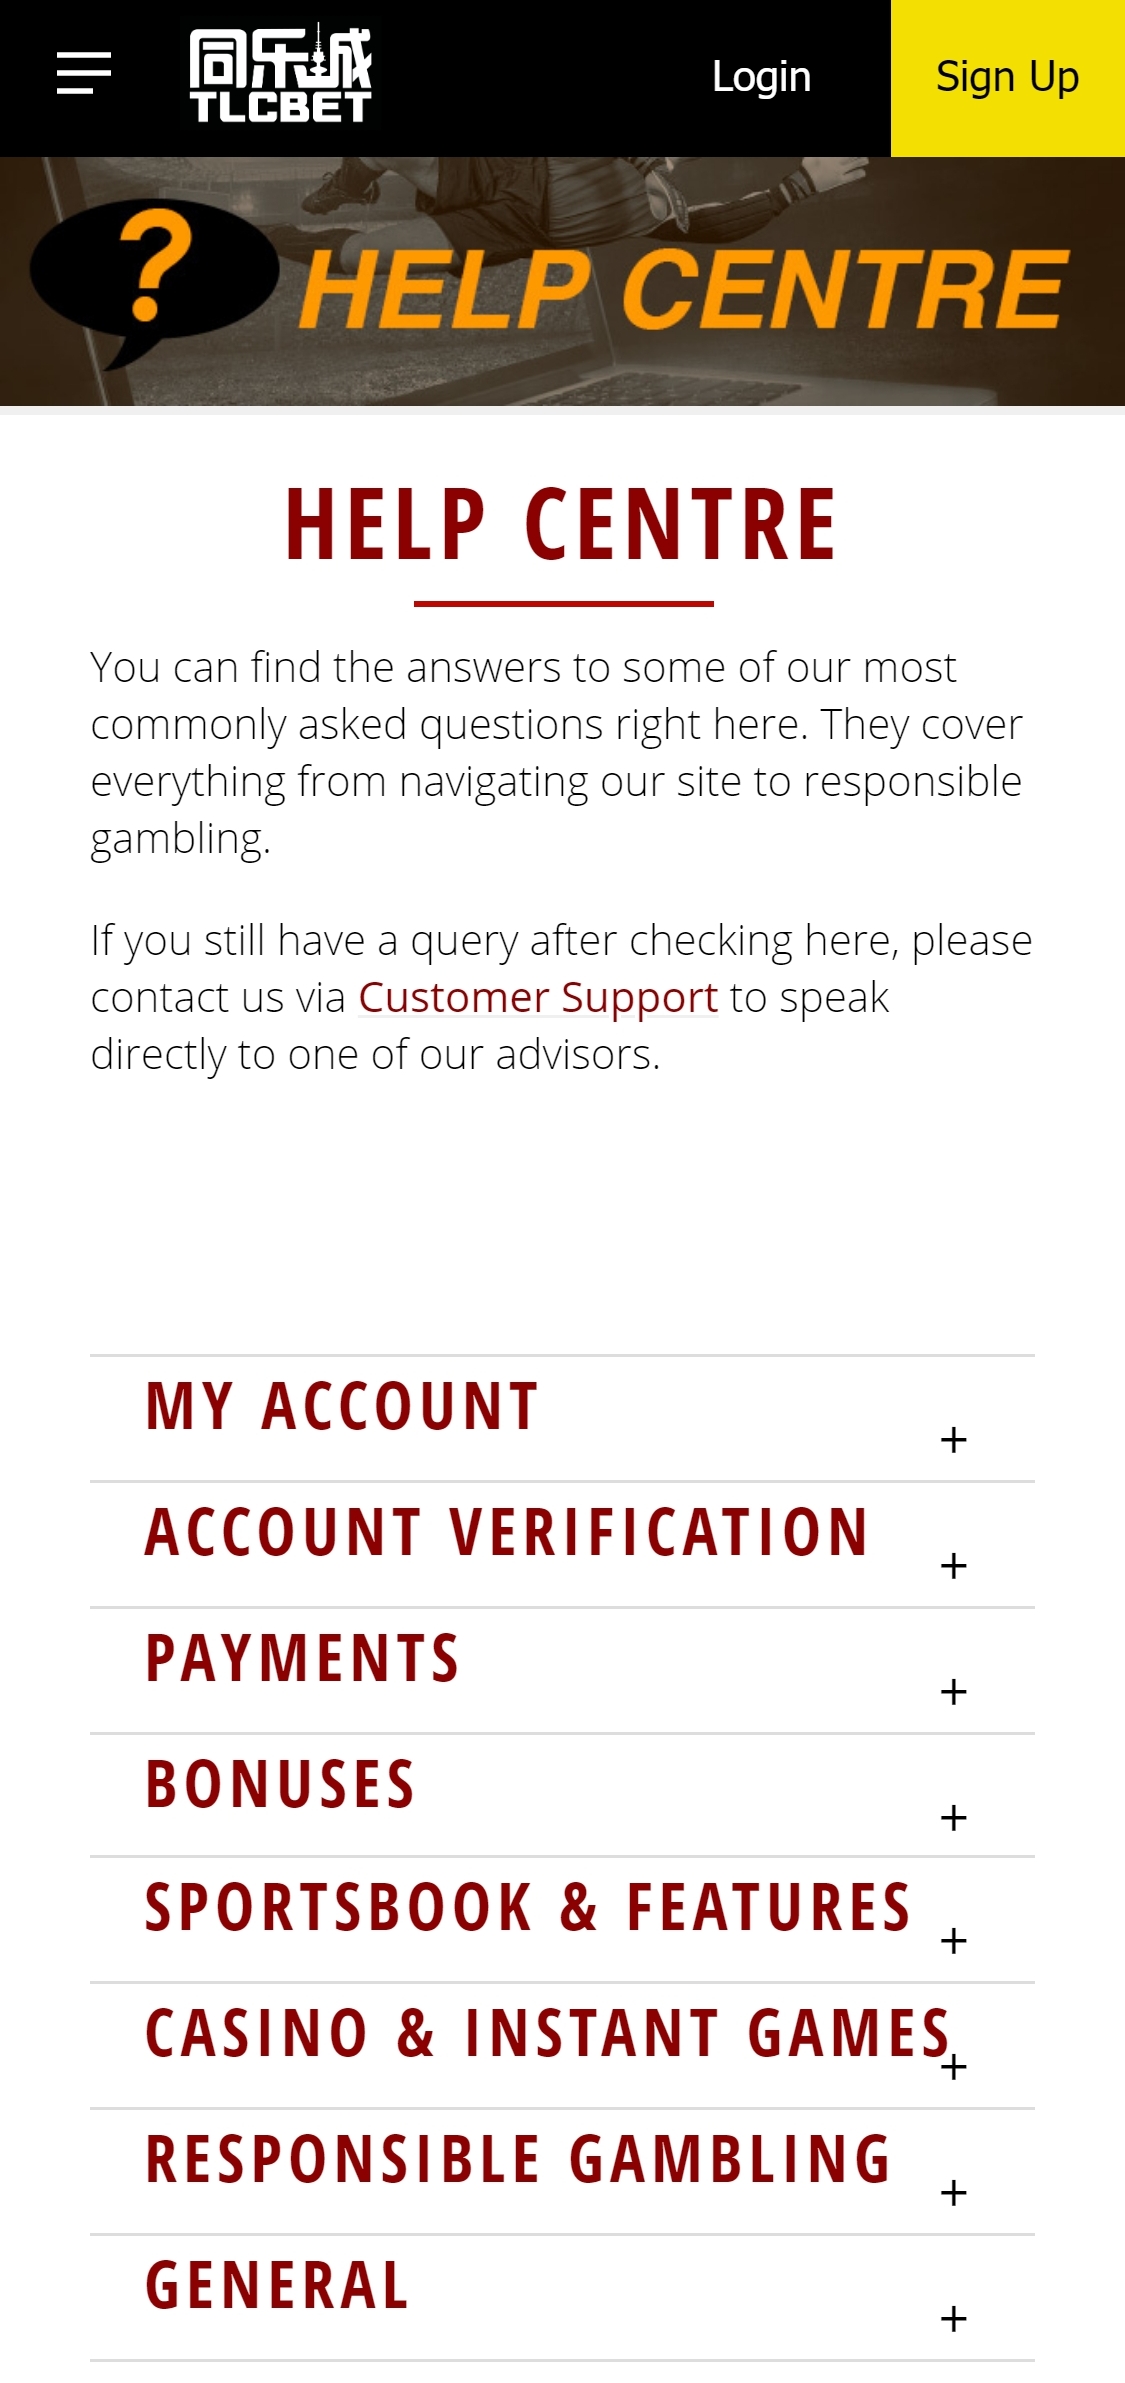 TLC Bet Casino Mobile Support Review